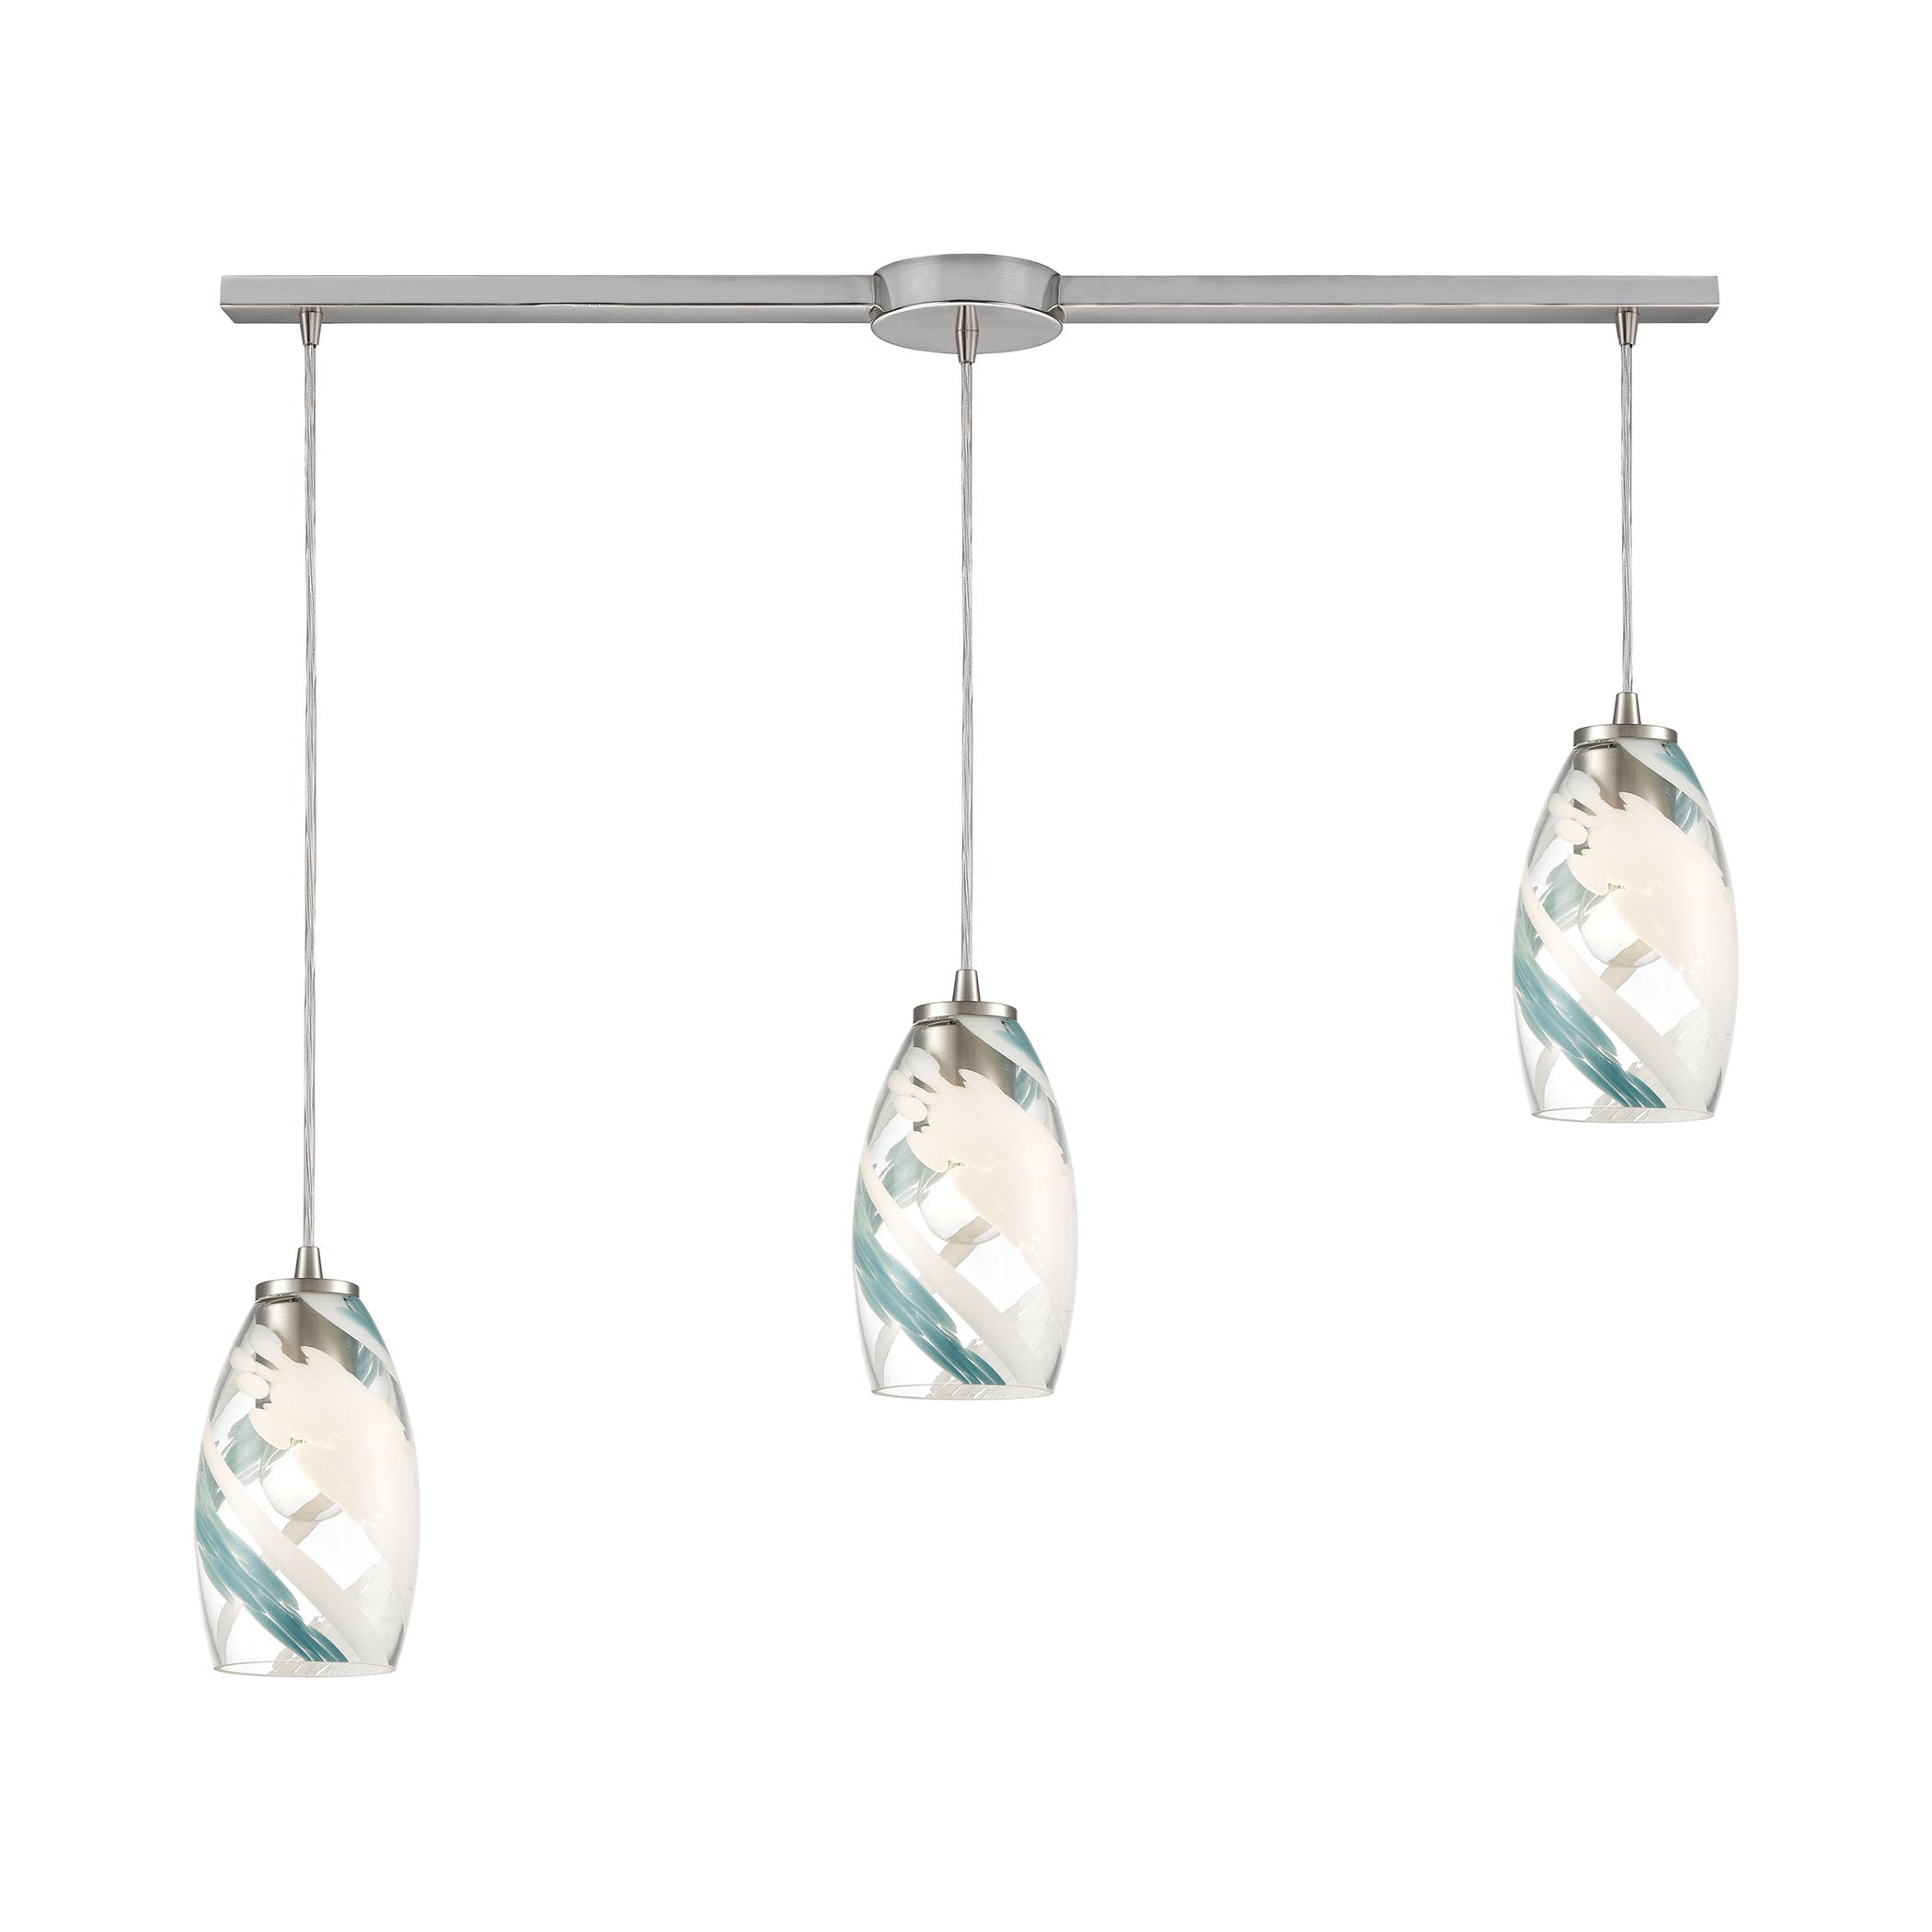 ELK Lighting 85211/3L Turbulence 3-Light Linear Mini Pendant Fixture in Satin Nickel with Clear, Aqua, and White Glass